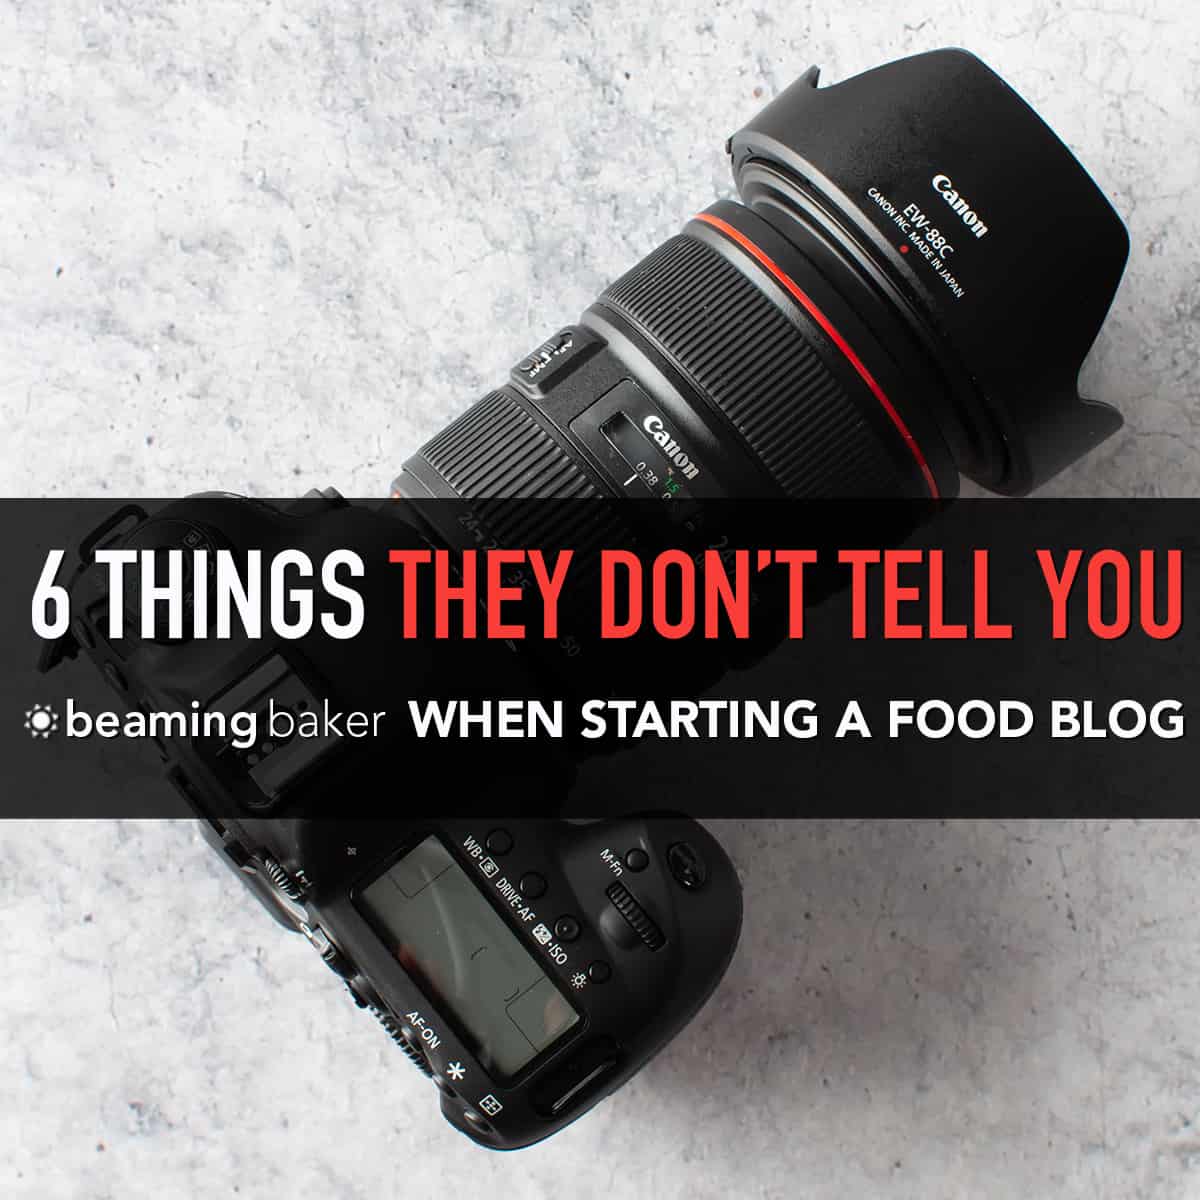 6 Things They Don’t Tell You When Starting a Food Blog